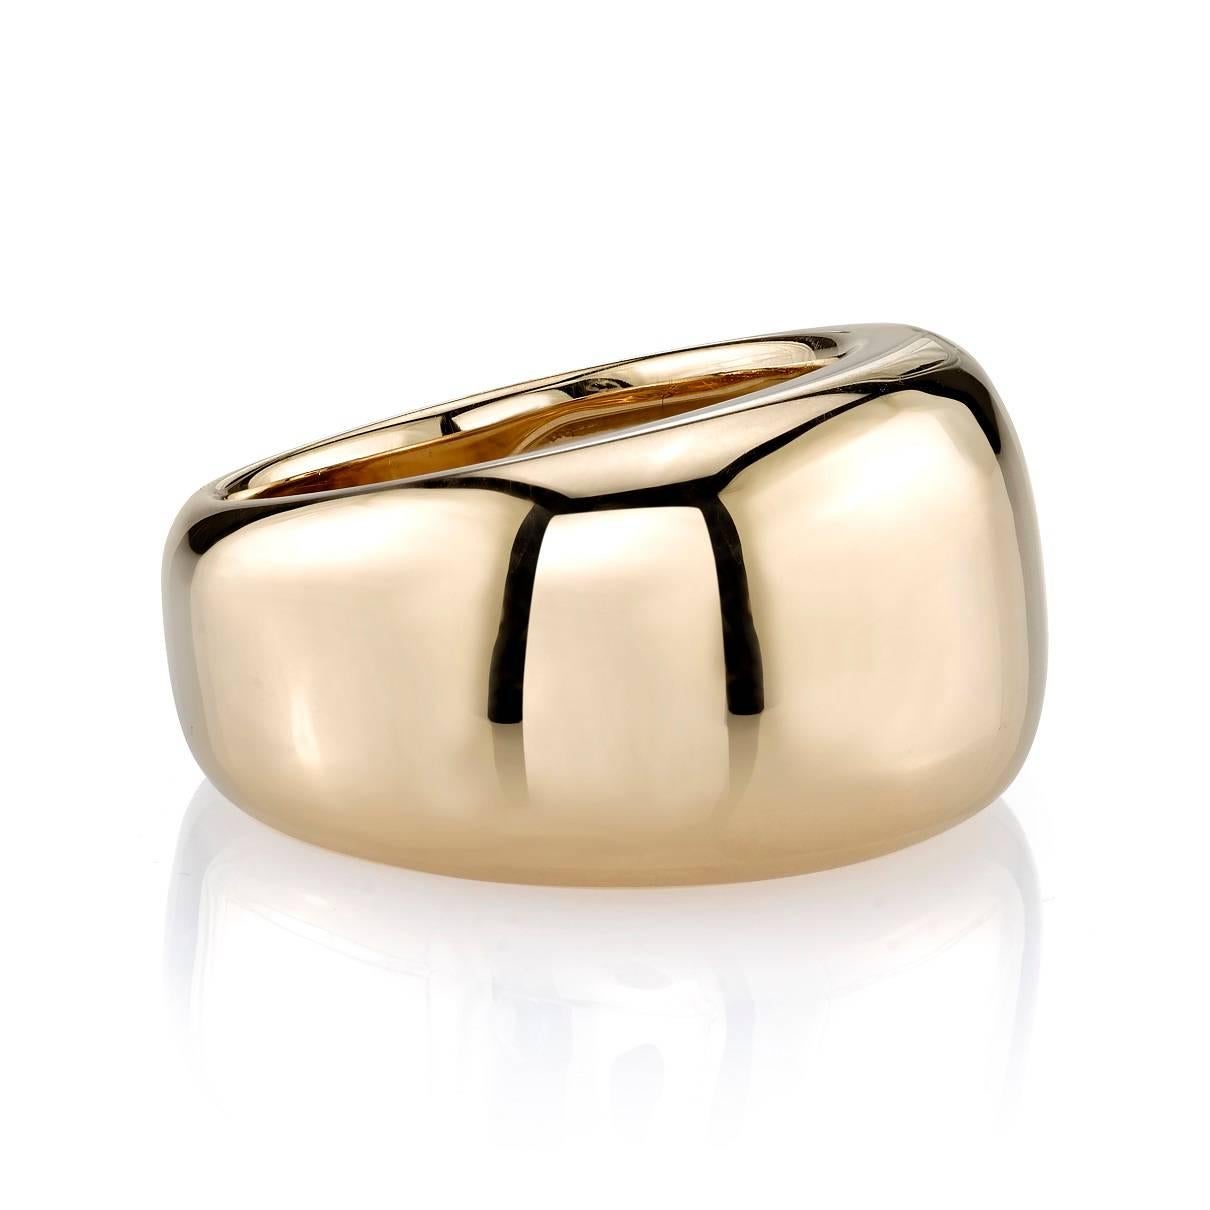 Polished wide domed 18k yellow gold cigar band measuring approximately 13mm at its widest point.

Band is a size 6 and can be sized to fit.

All of our jewelry is individually made to order in Los Angeles, please allow 6-8 weeks for delivery. 